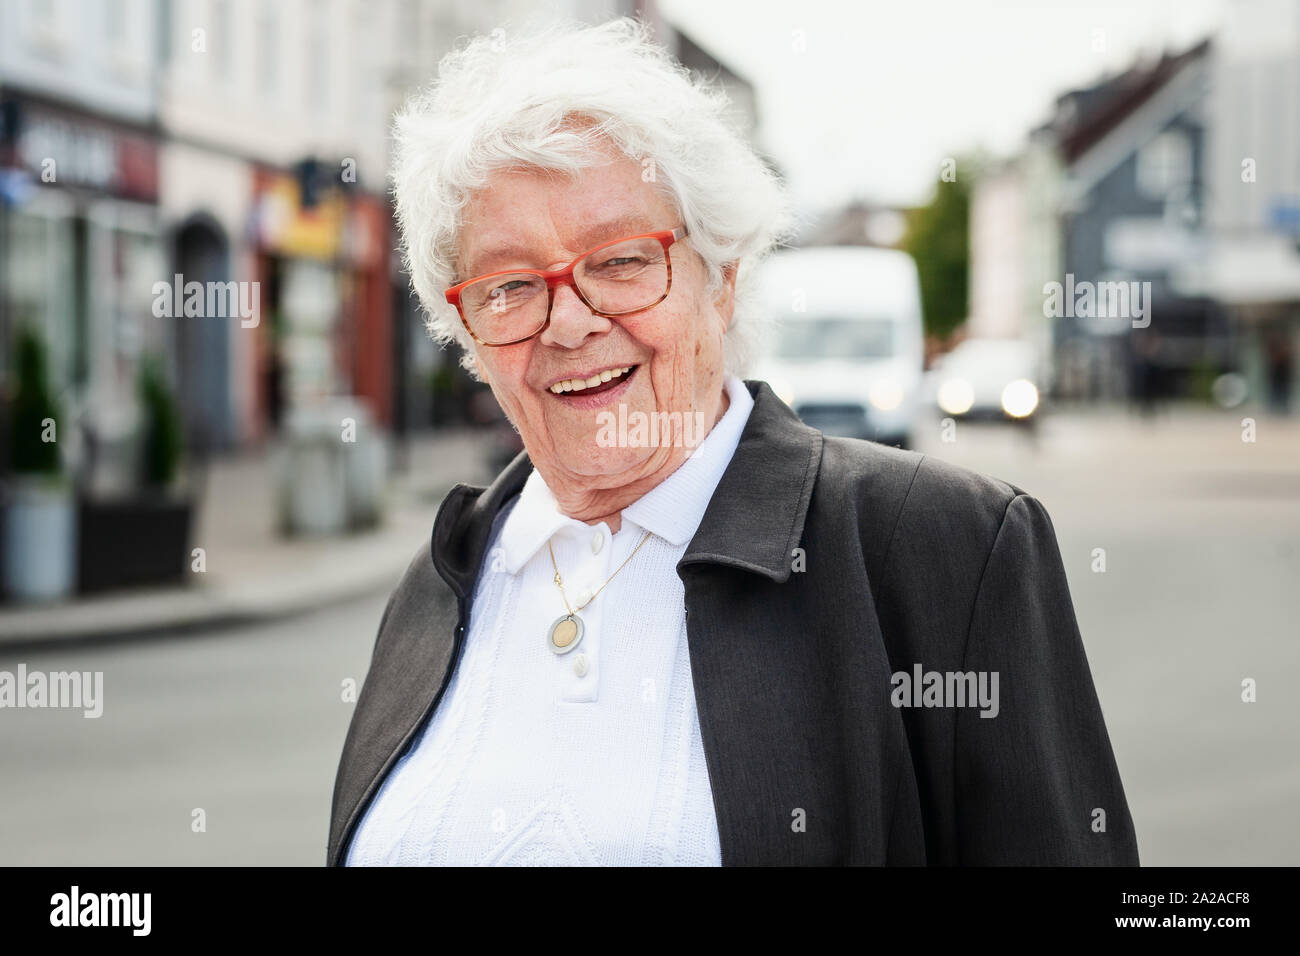 Cheerful smiling old woman walking in city Banque D'Images